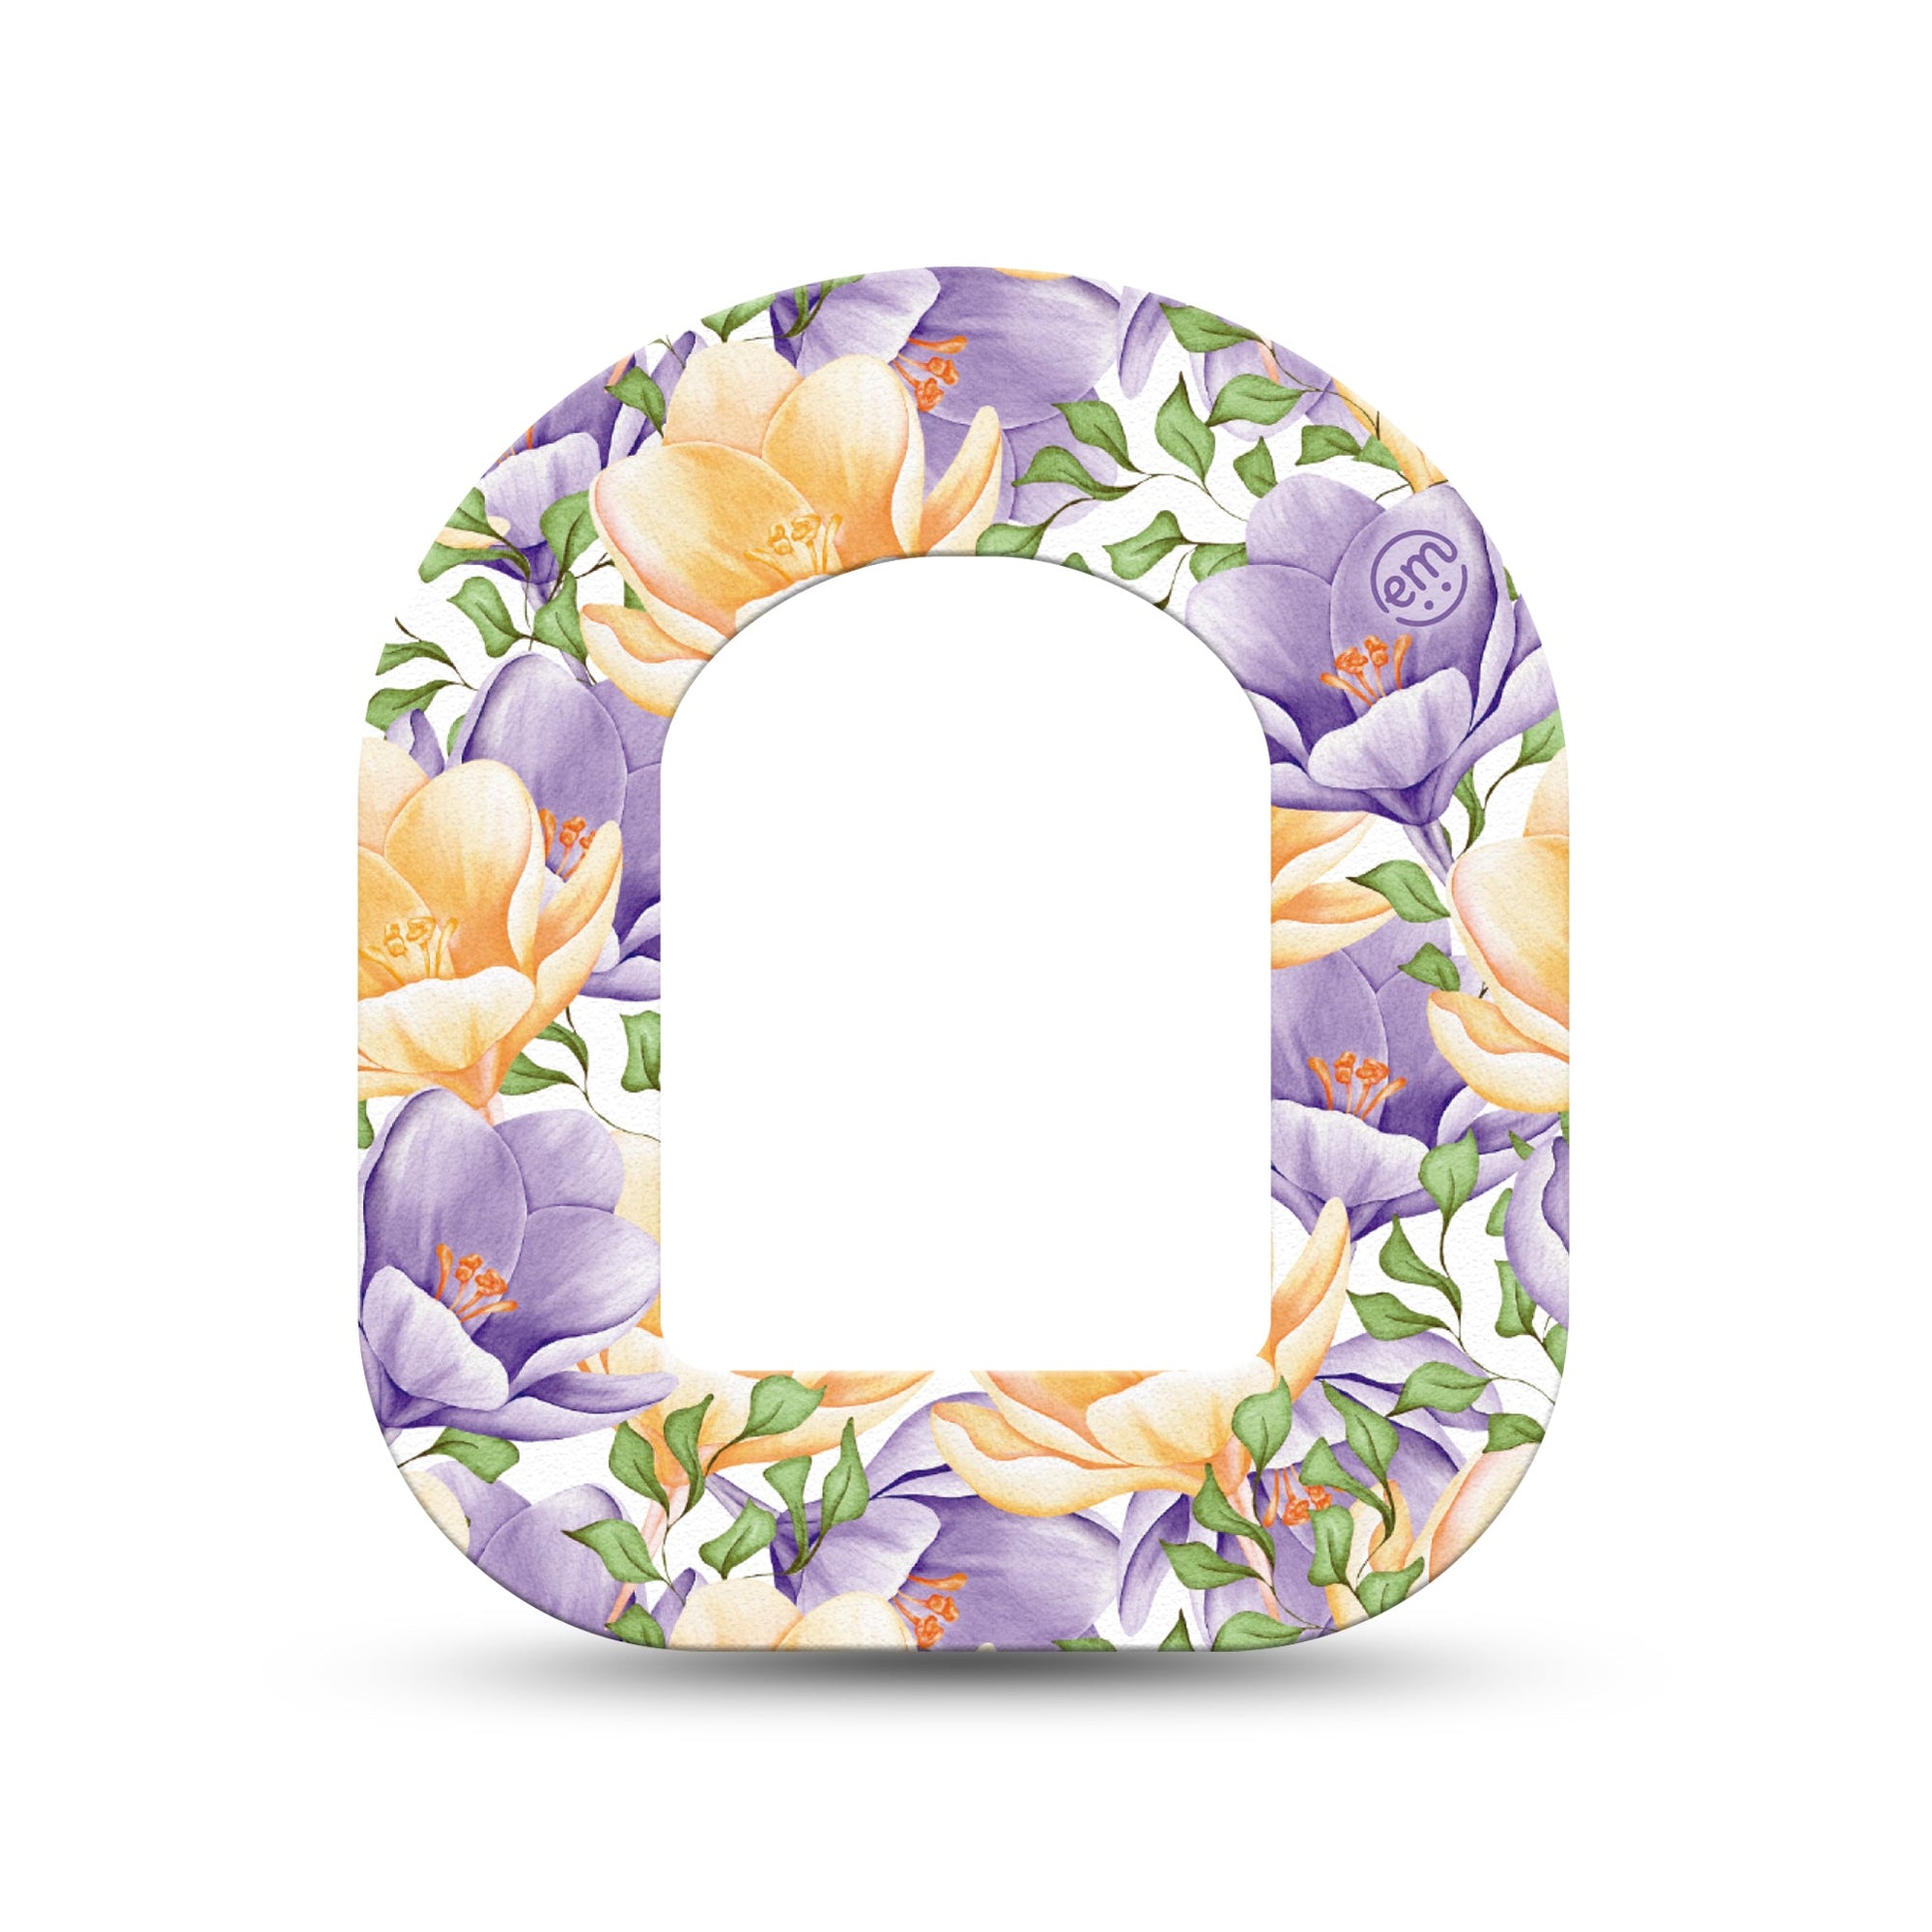 ExpressionMed Crocus Flowers Pod Mini Tape Single, Spring Blooms Overlay Tape Pump Design